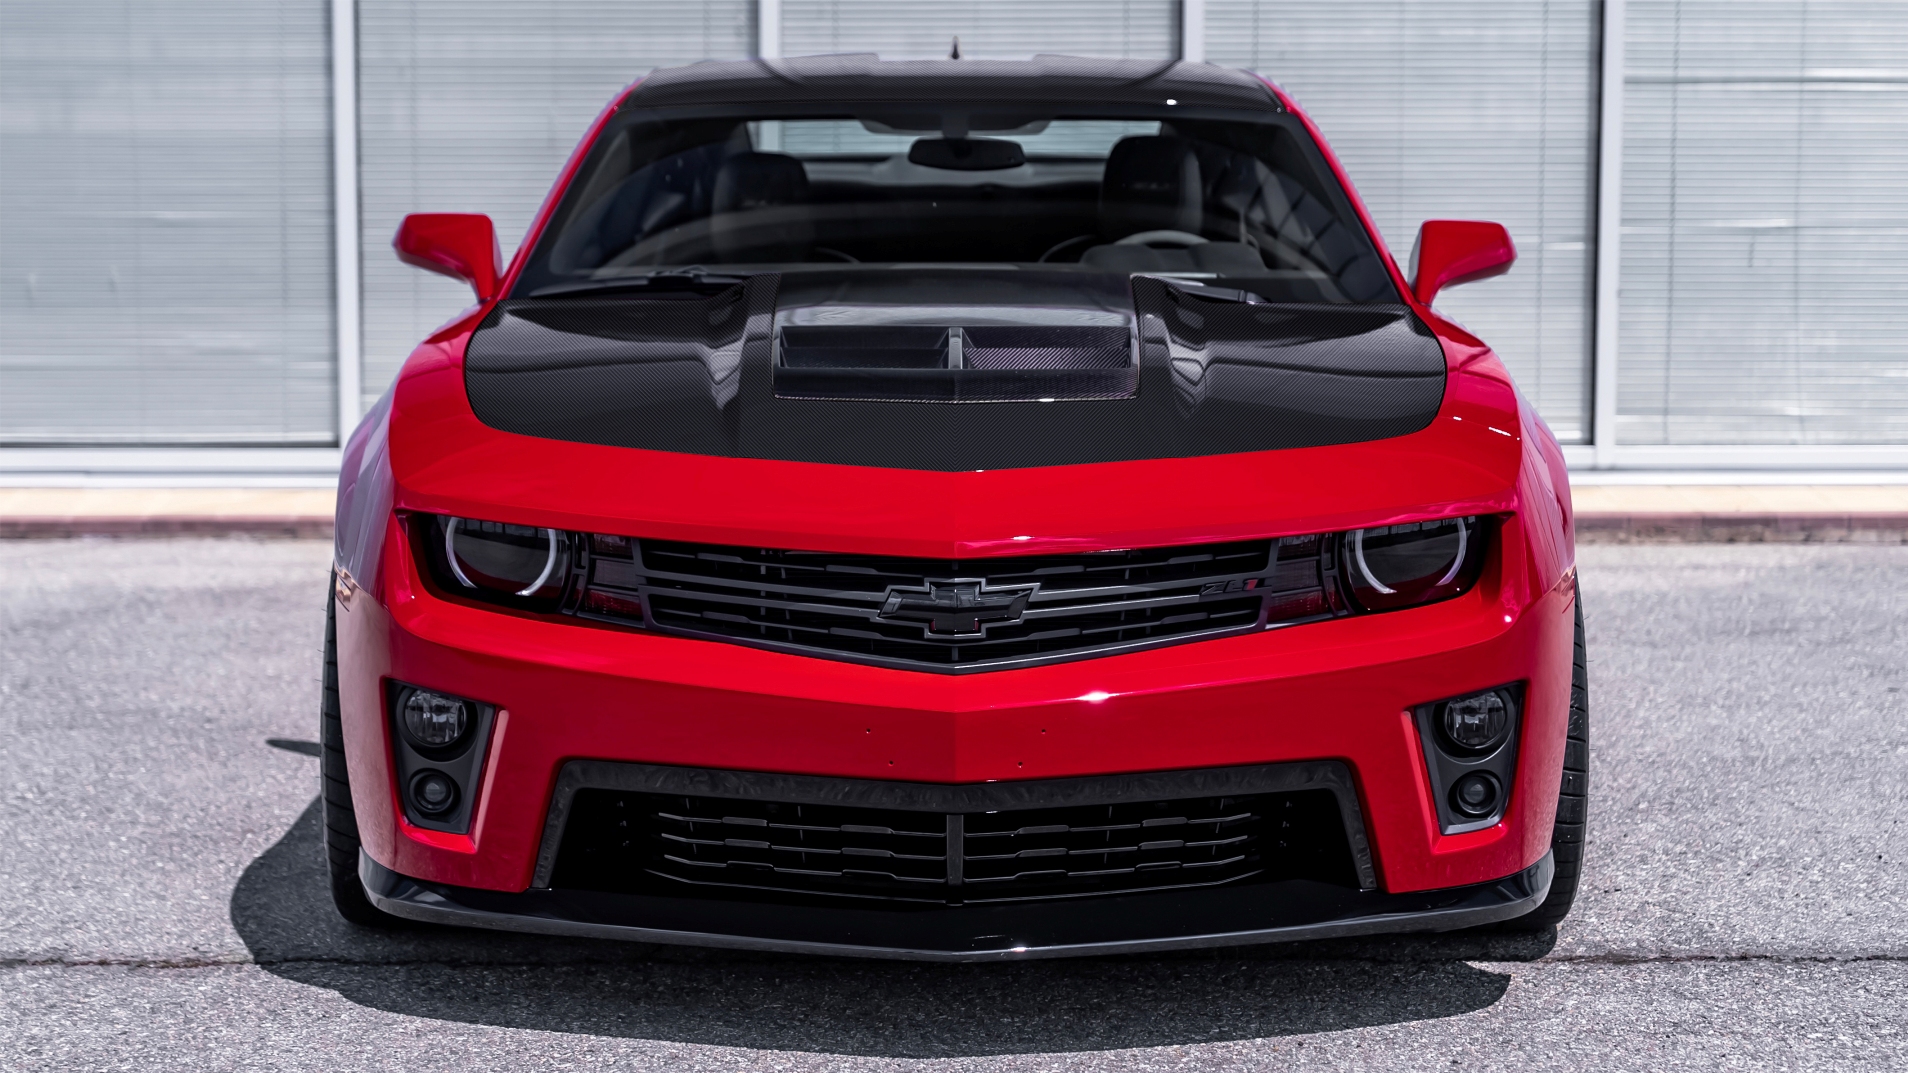 Check our price and buy a SCL Performance body kit for Chevrolet Camaro!